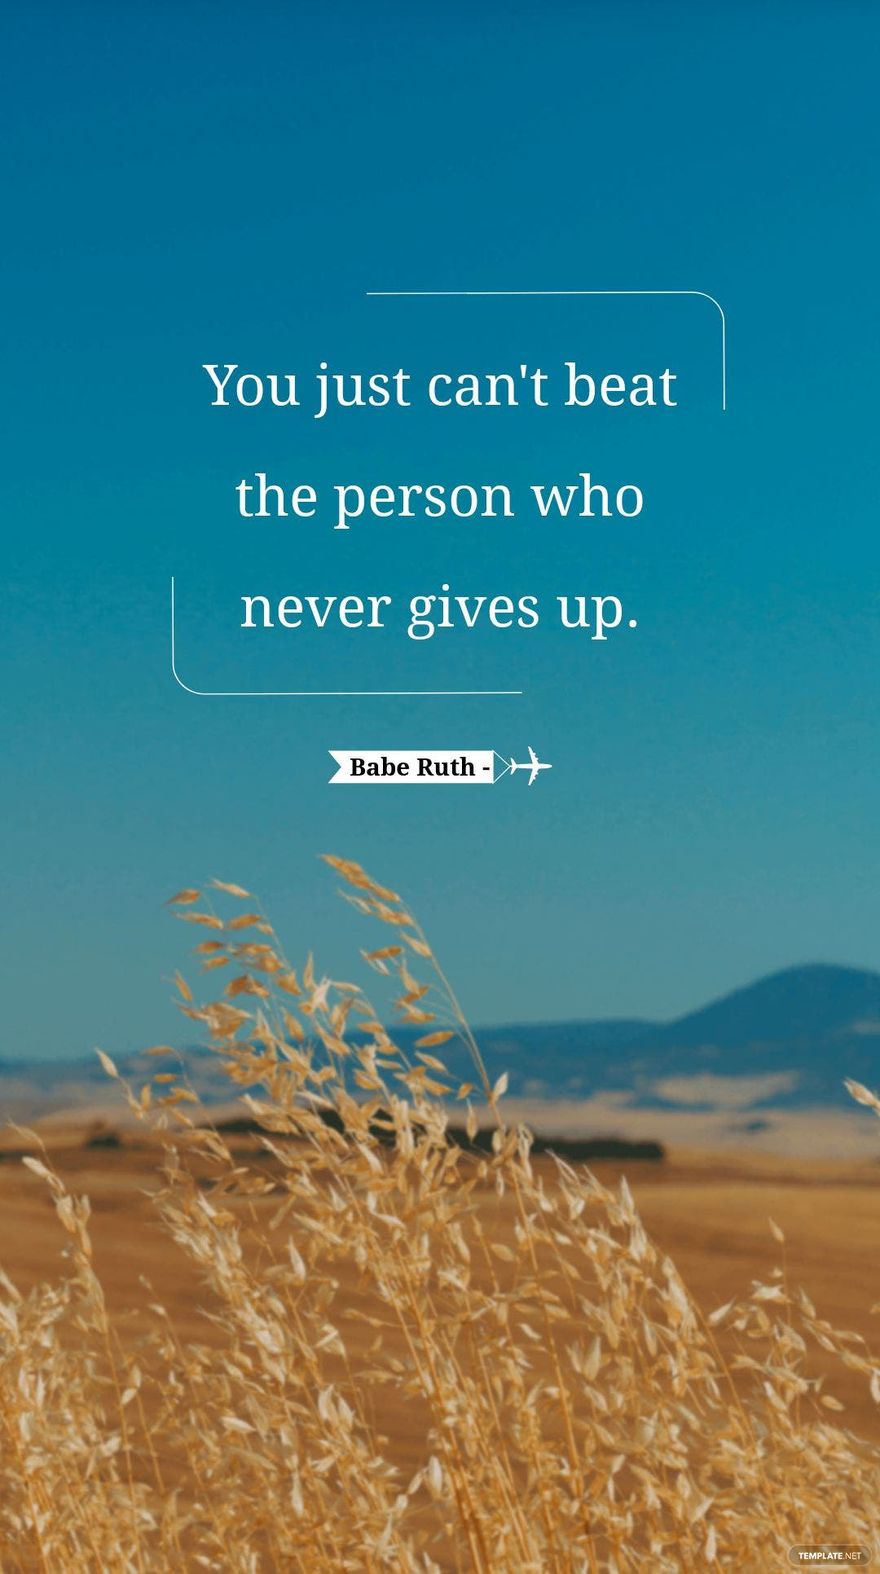 Babe Ruth - You just can't beat the person who never gives up.